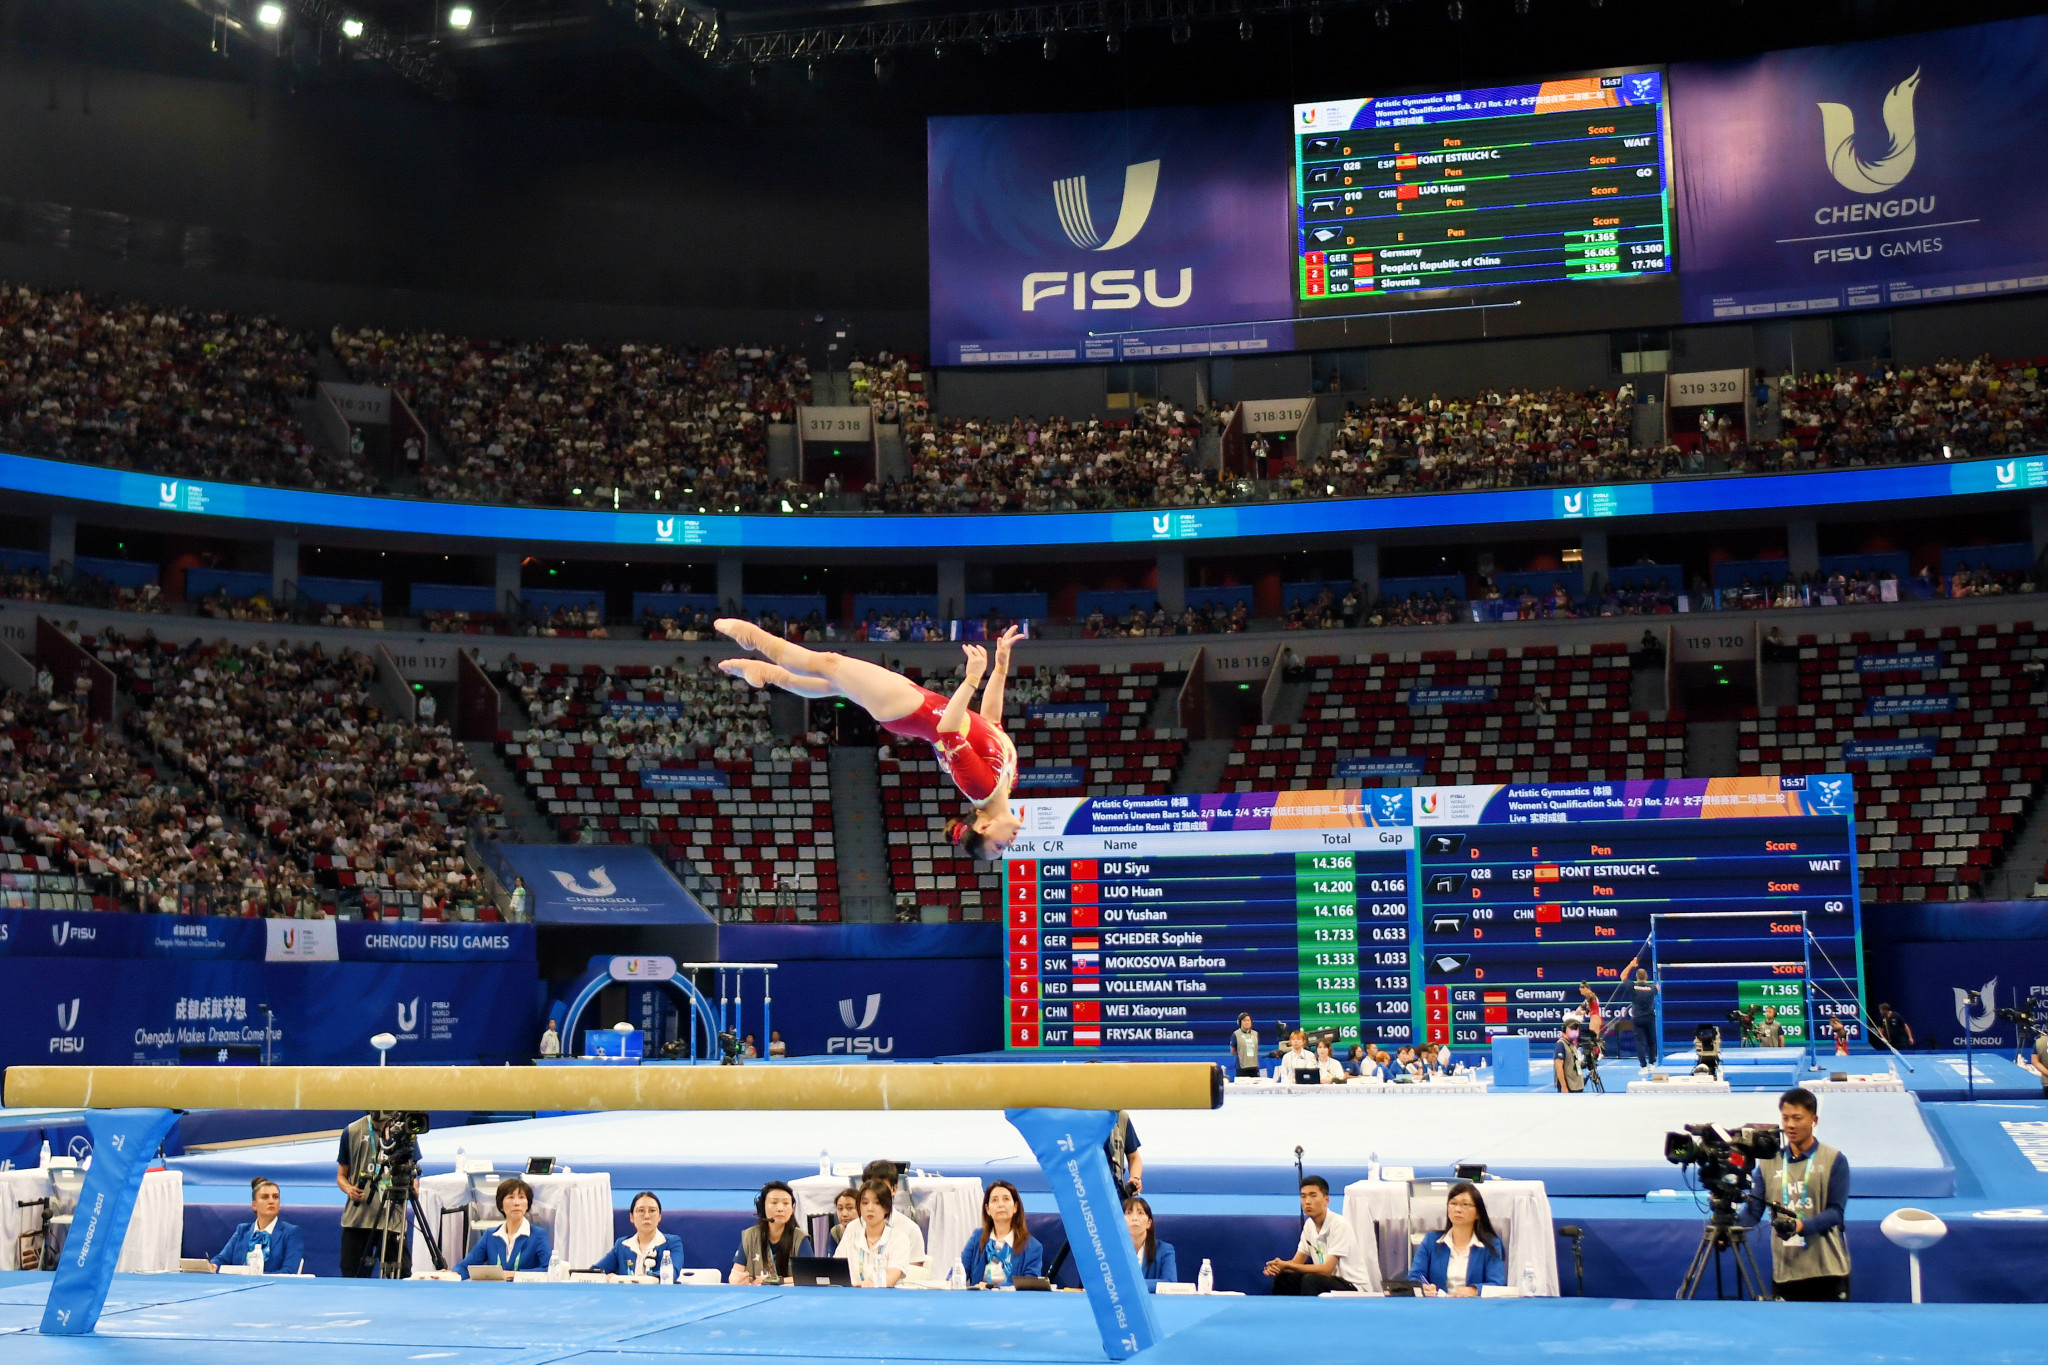 Luo Huan helped the hosts to a victorious 163.029 as they pipped Japan and Spain to the top of the podium ©Chengdu 2021